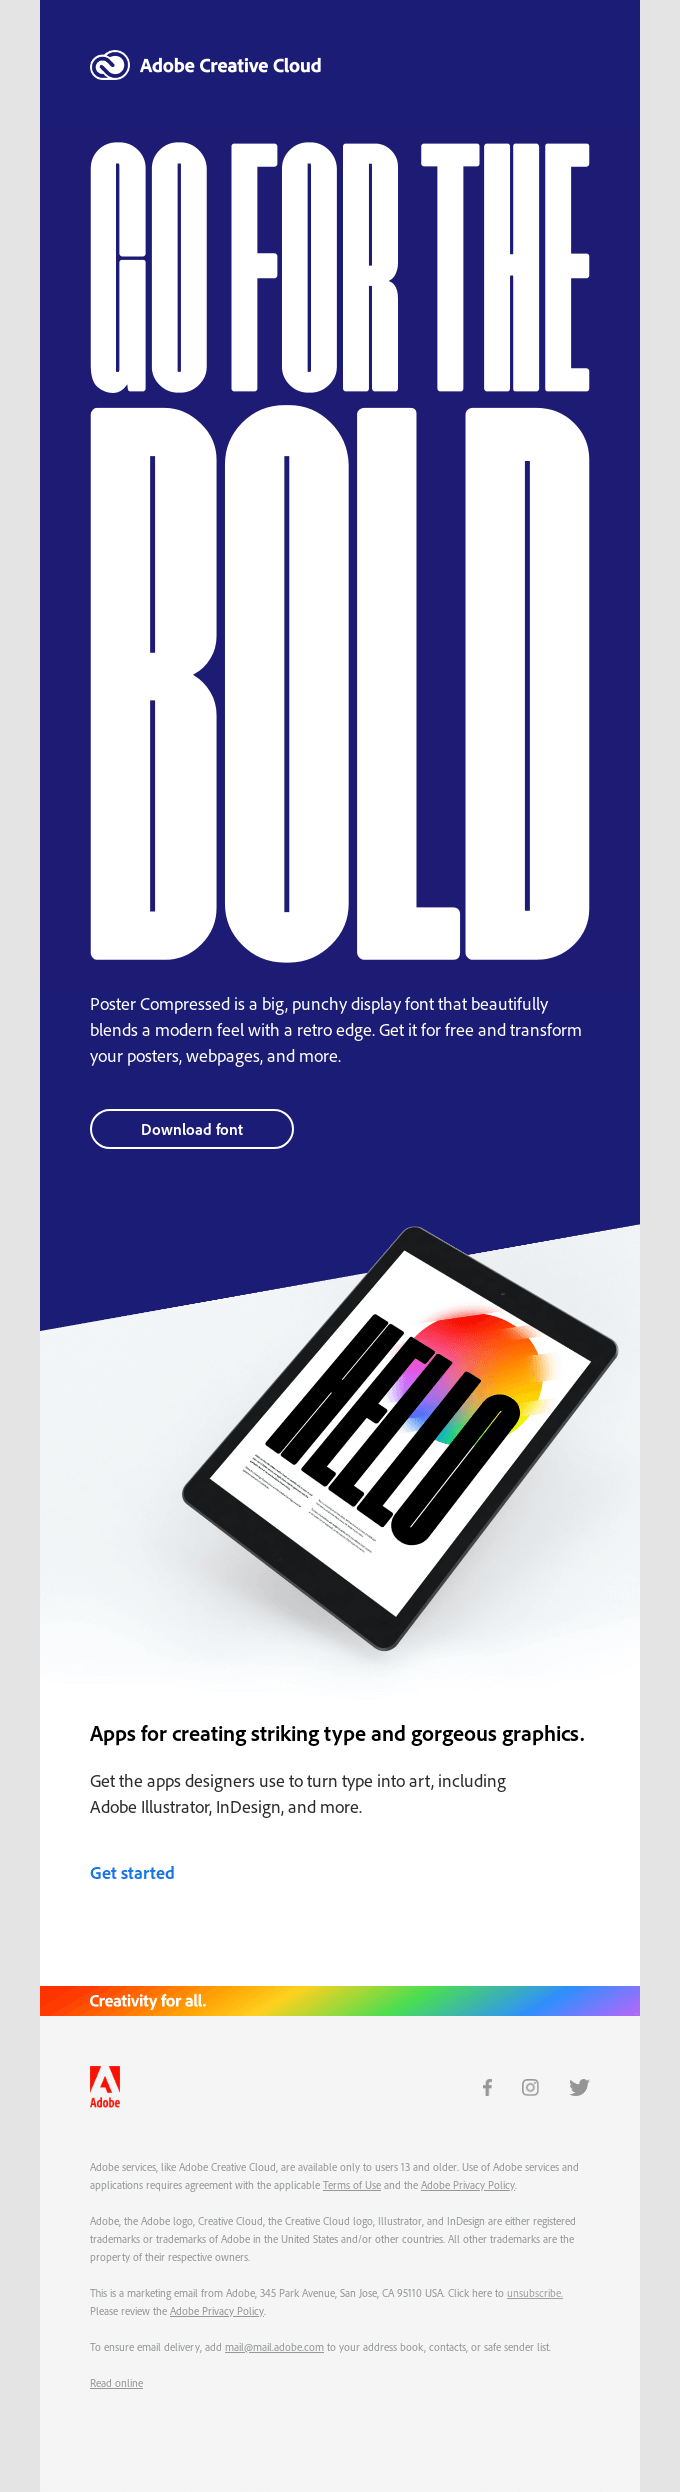 A free font just for you - Adobe Email Newsletter